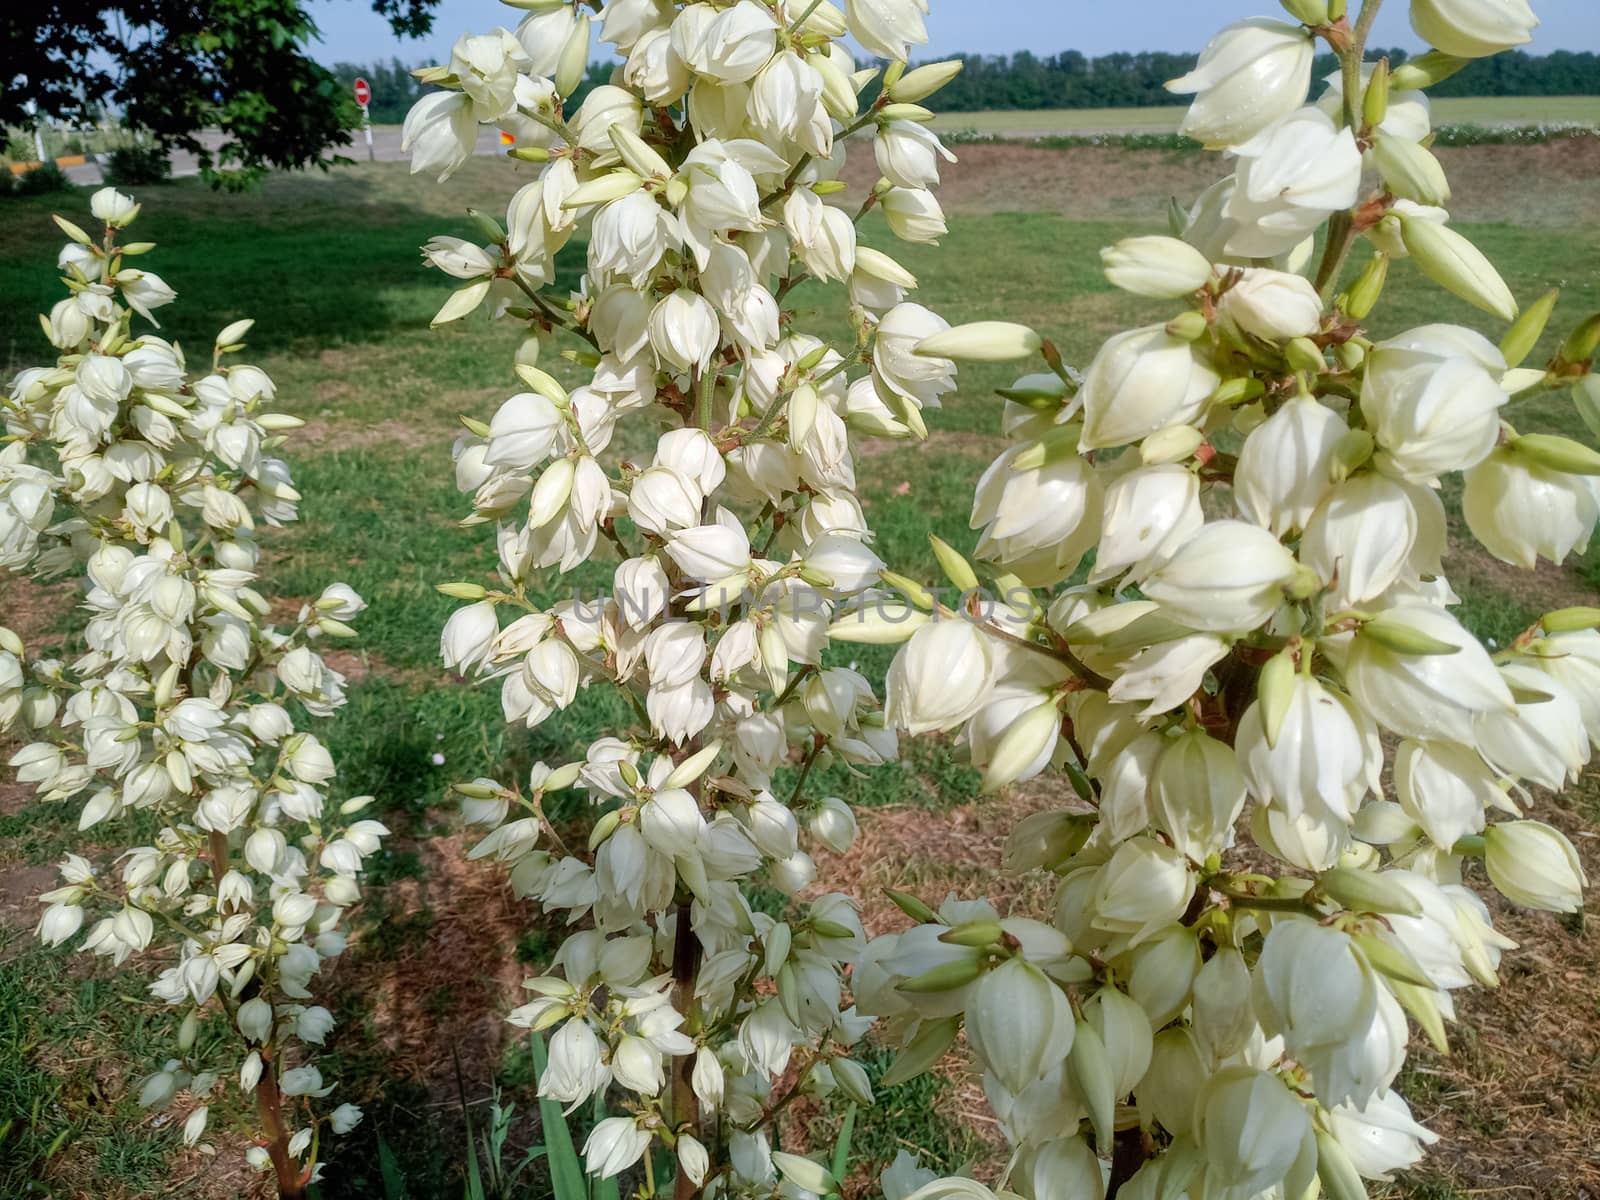 White yucca flowers on the lawn. by fedoseevaolga